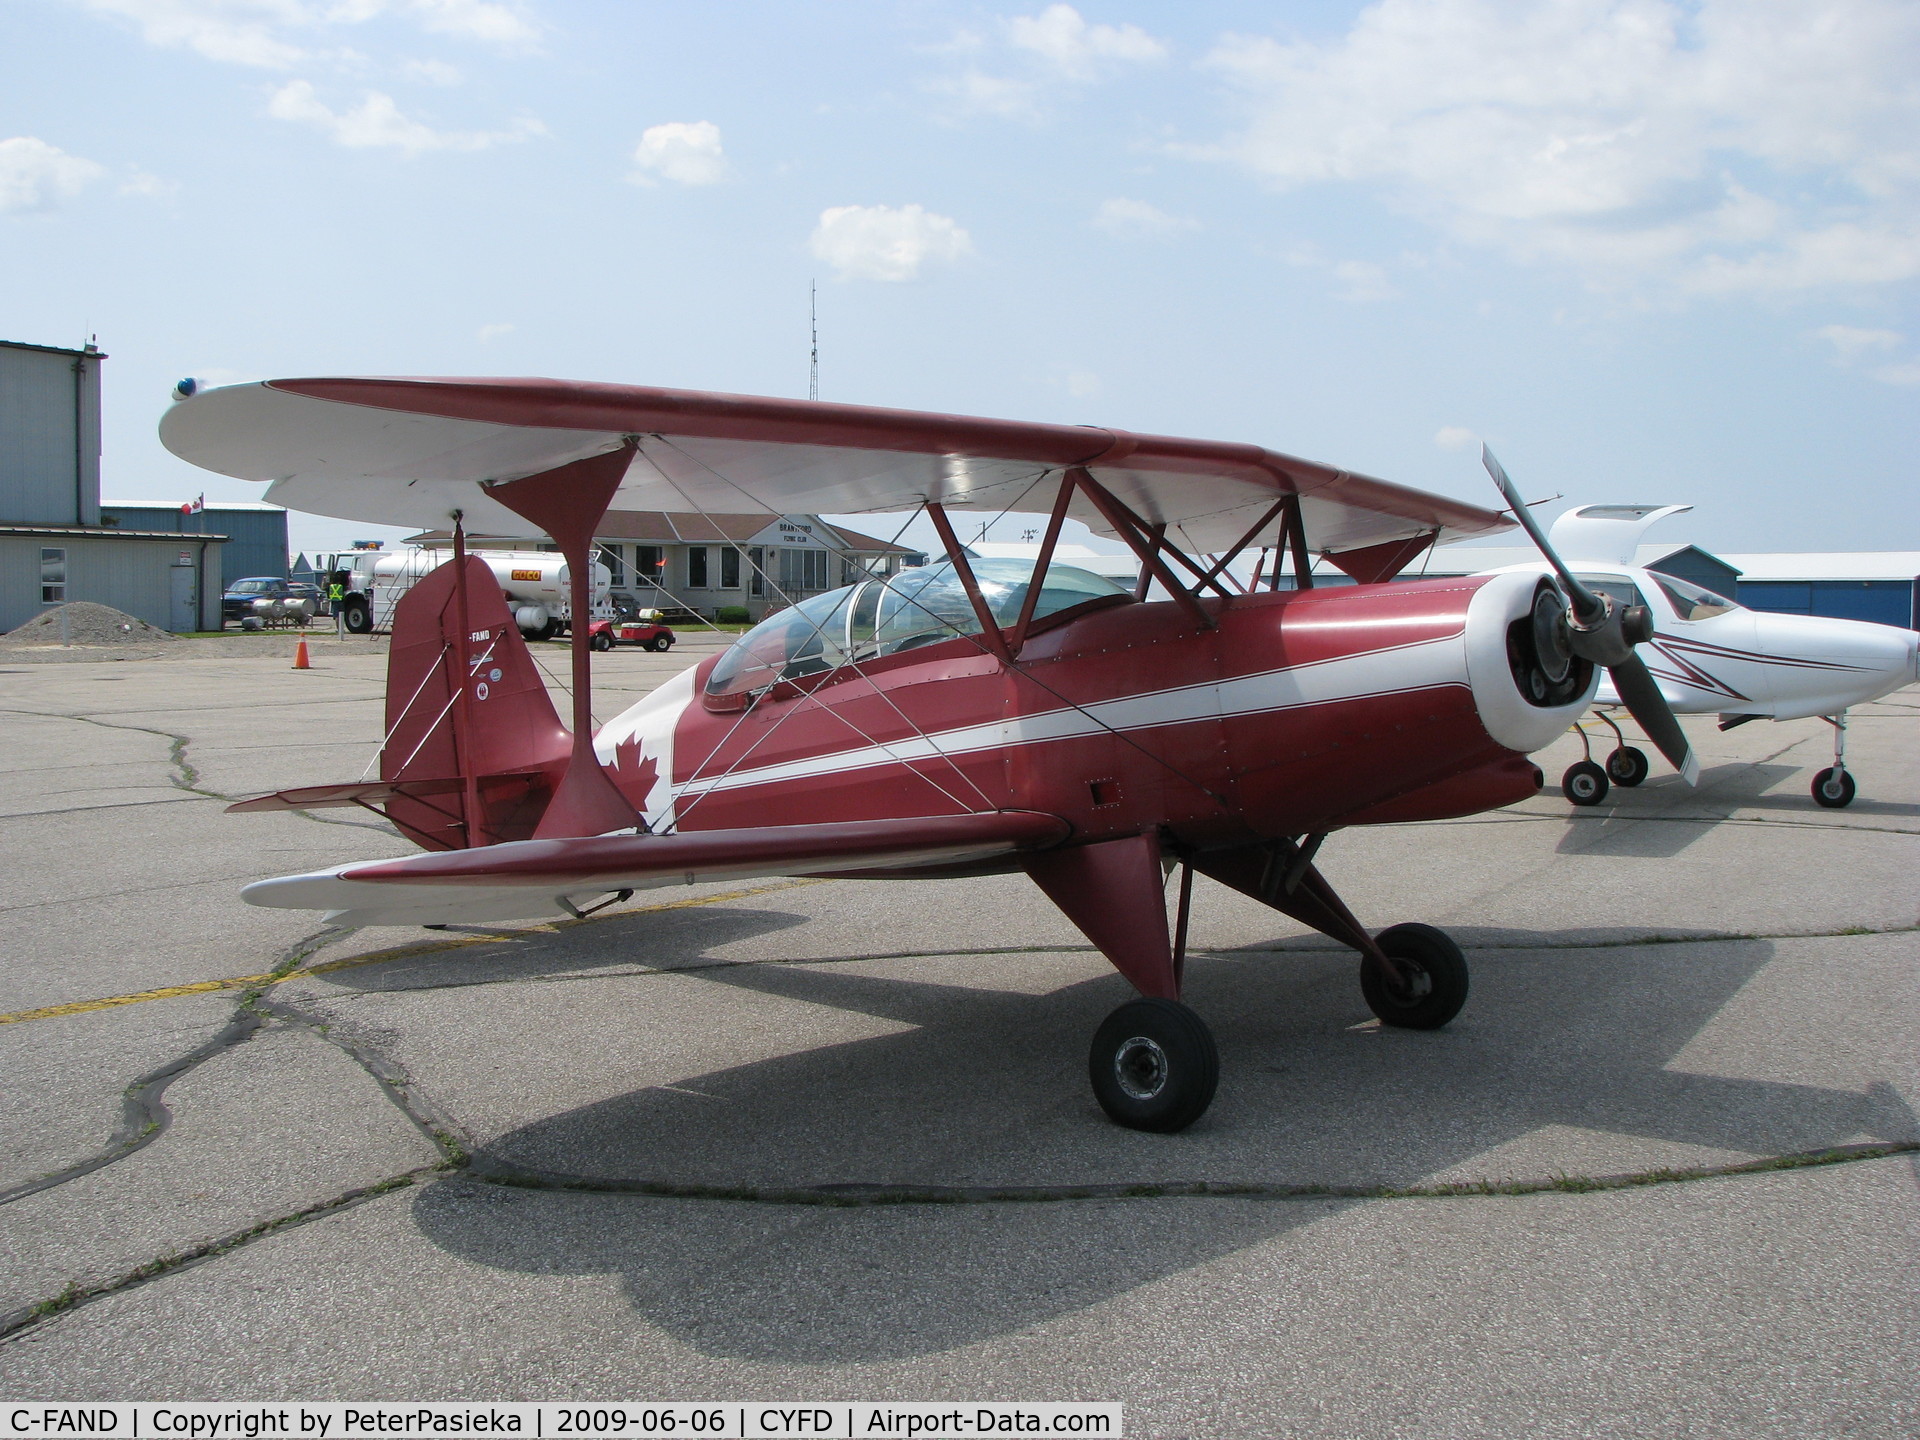 C-FAND, 1973 Stolp SA-300 Starduster Too C/N 587, @ Brantford Airport